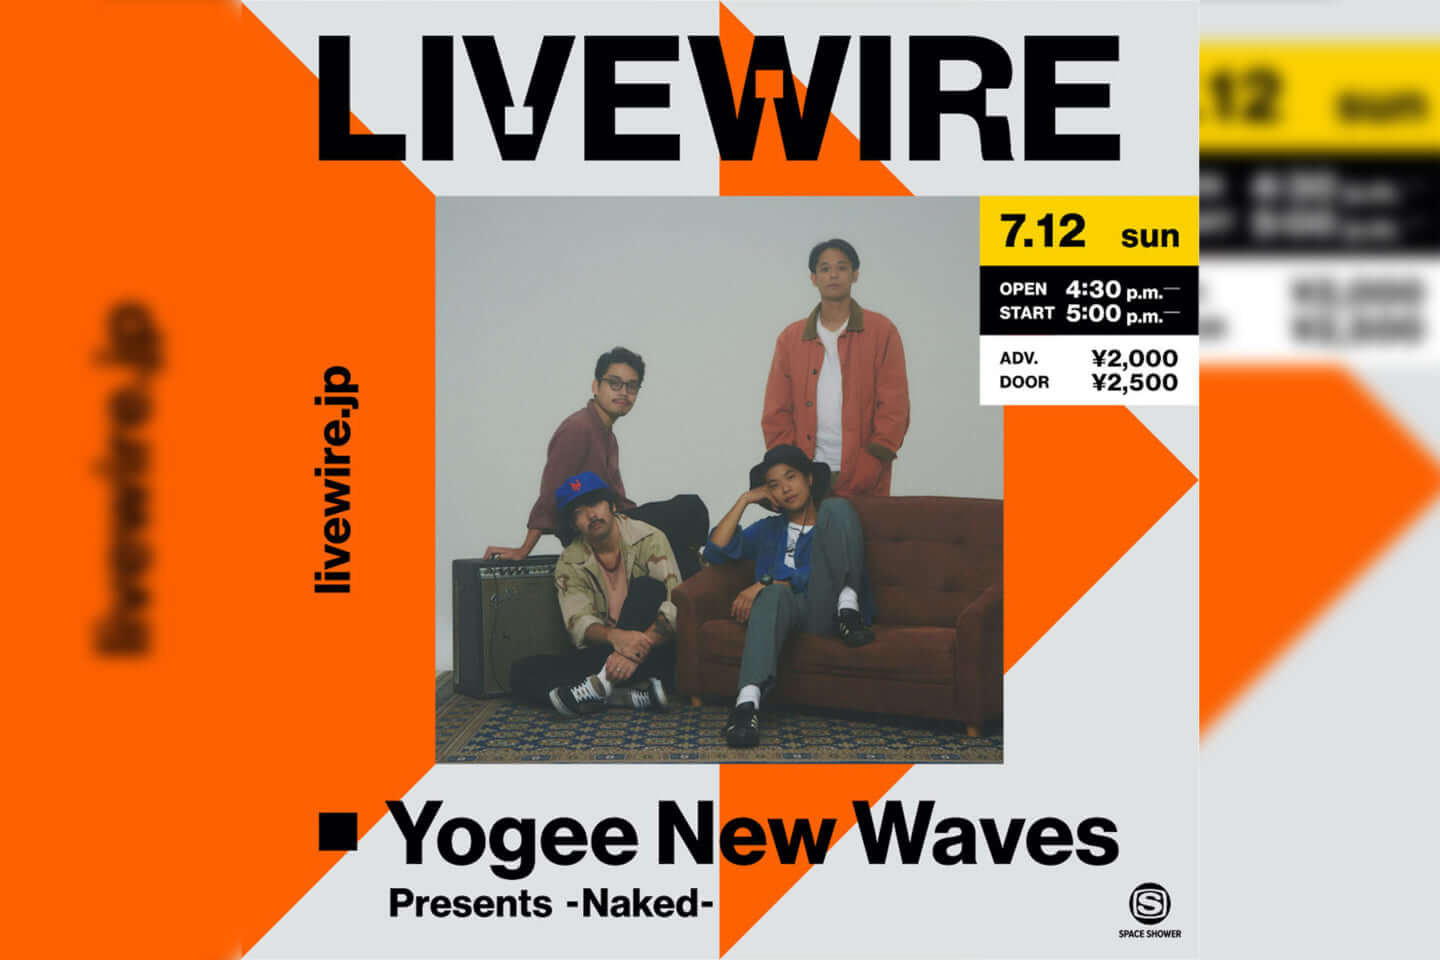 LIVEWIRE Yogee New Waves